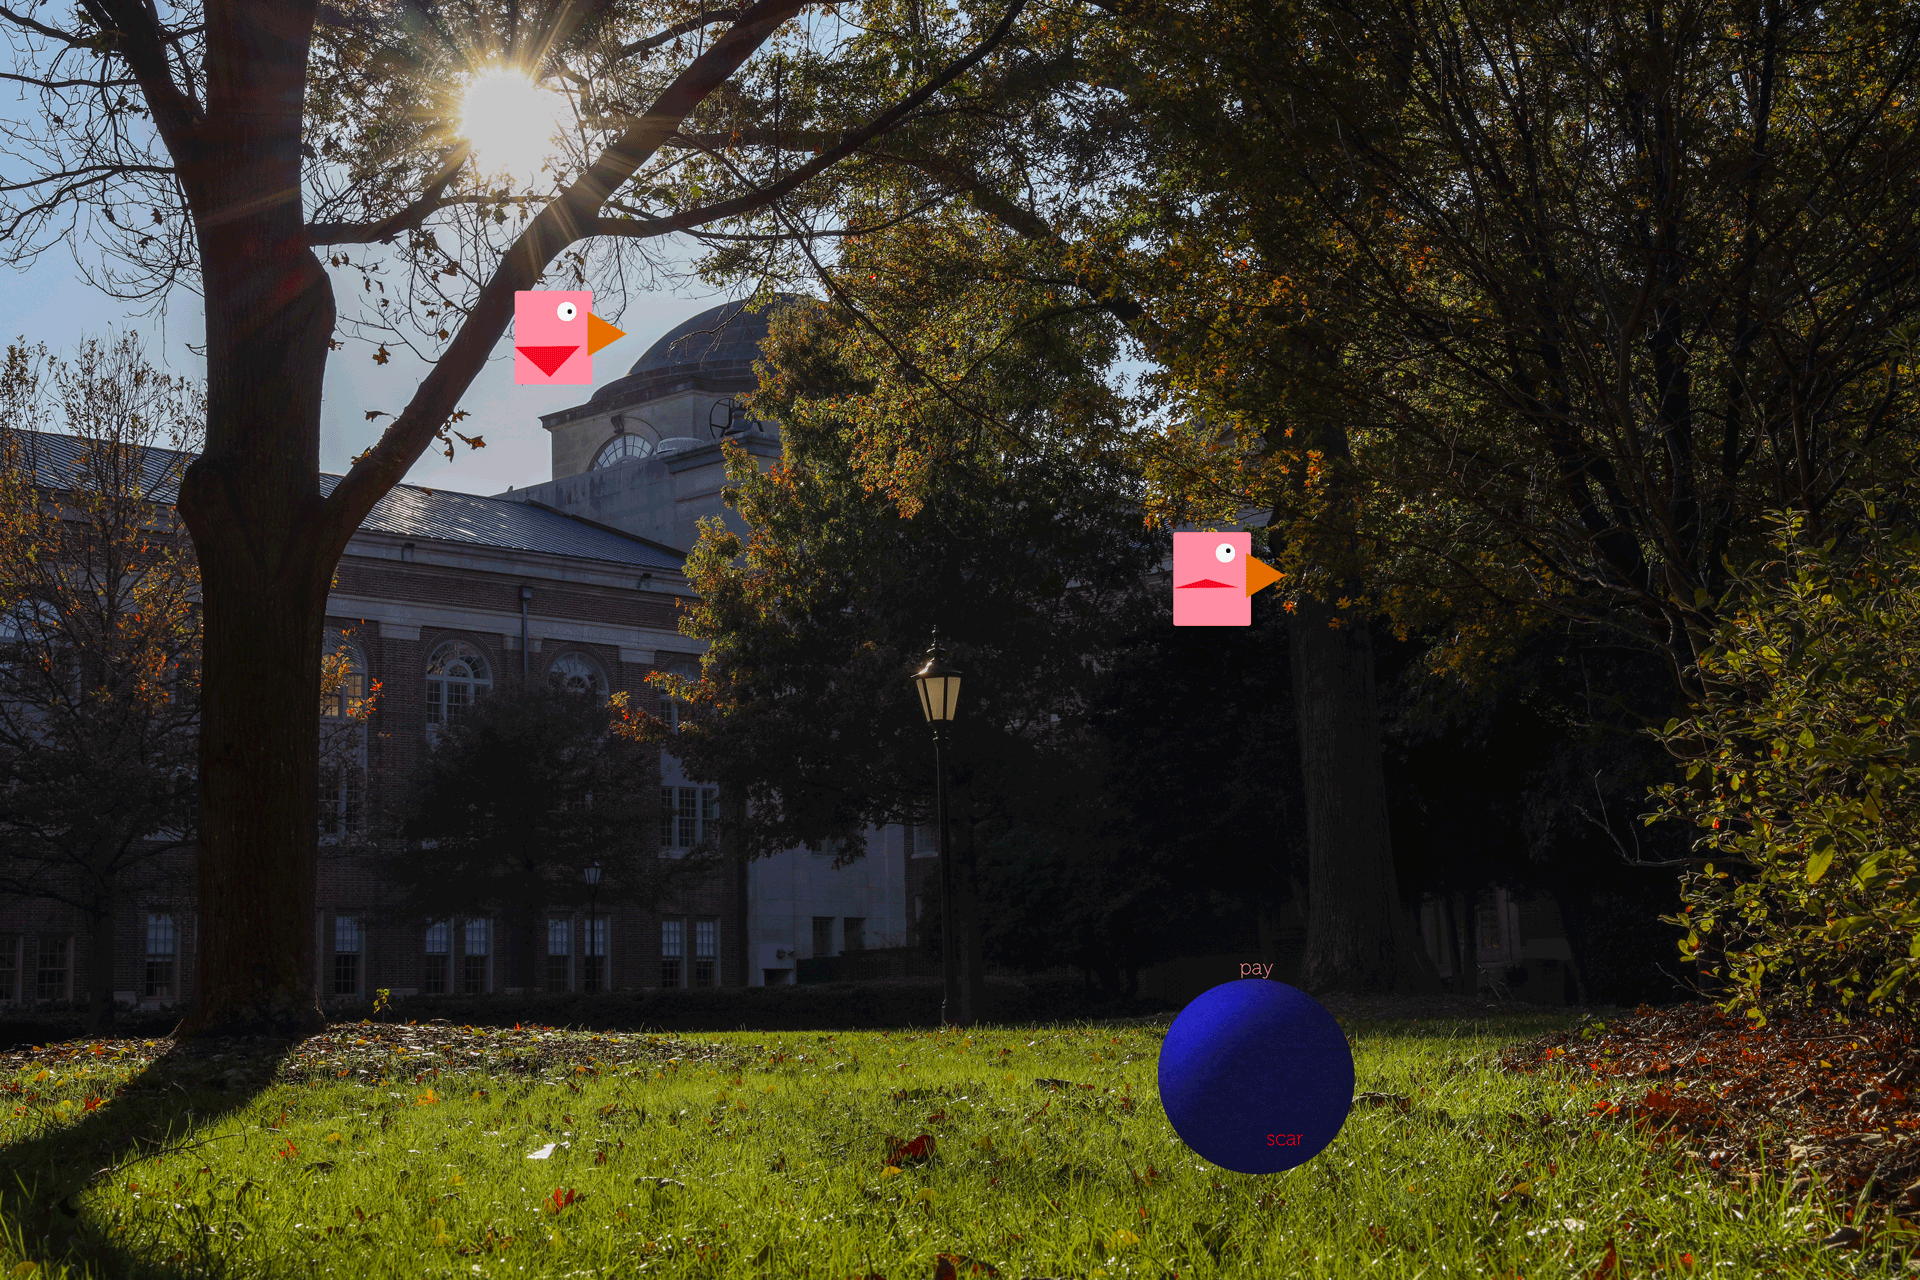 Shows an image of Davidson College on a sunny day, with two pink birds ignoring a jarringly blue ball down below.